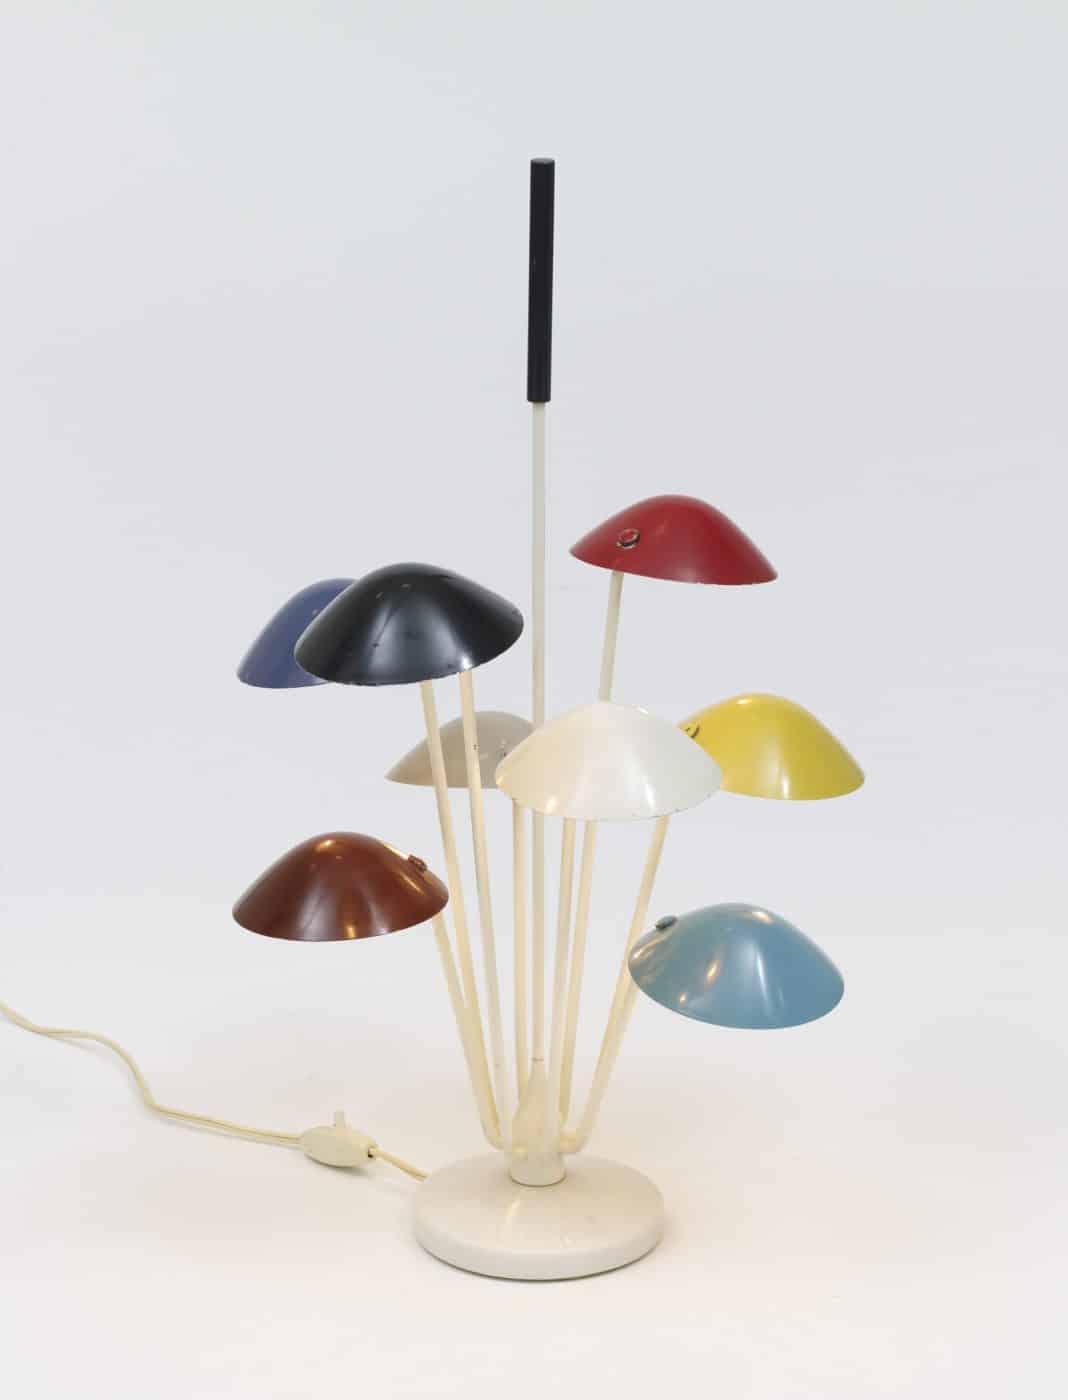 The 534 table light, designed by Gino Sarfatti for Arteluce, from "Electrifying Design: A Century of Lighting," at the Museum of Fine Arts, Houston